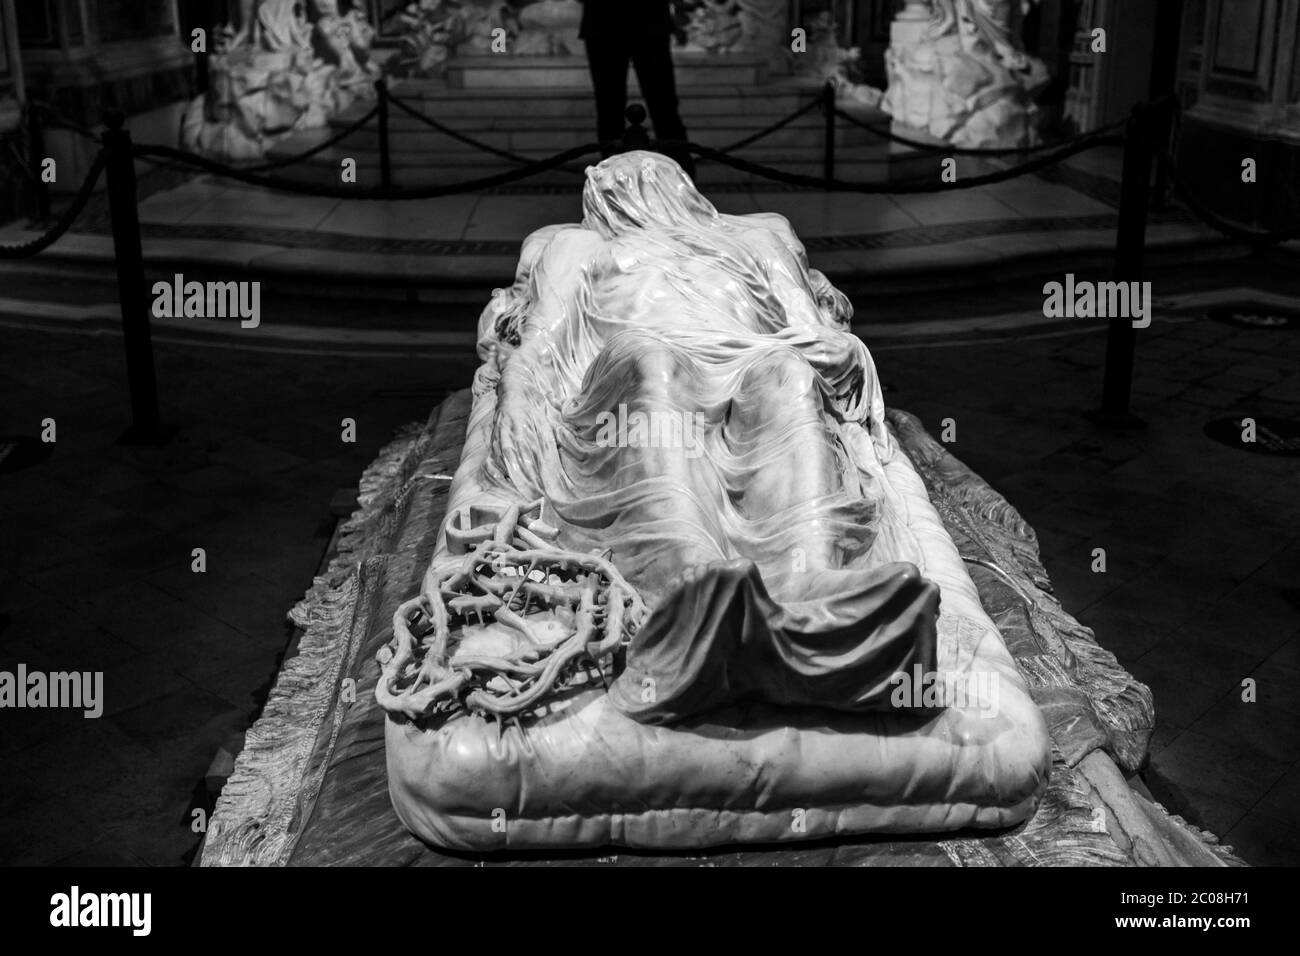 Napoli, CAMPANIA, ITALIA. 11th June, 2020. 06/11/2020 Naples, reopening of the Sansevero Chapel in the heart of Naples after closing to tourists for the Covid-19 pandemic Credit: Fabio Sasso/ZUMA Wire/Alamy Live News Stock Photo